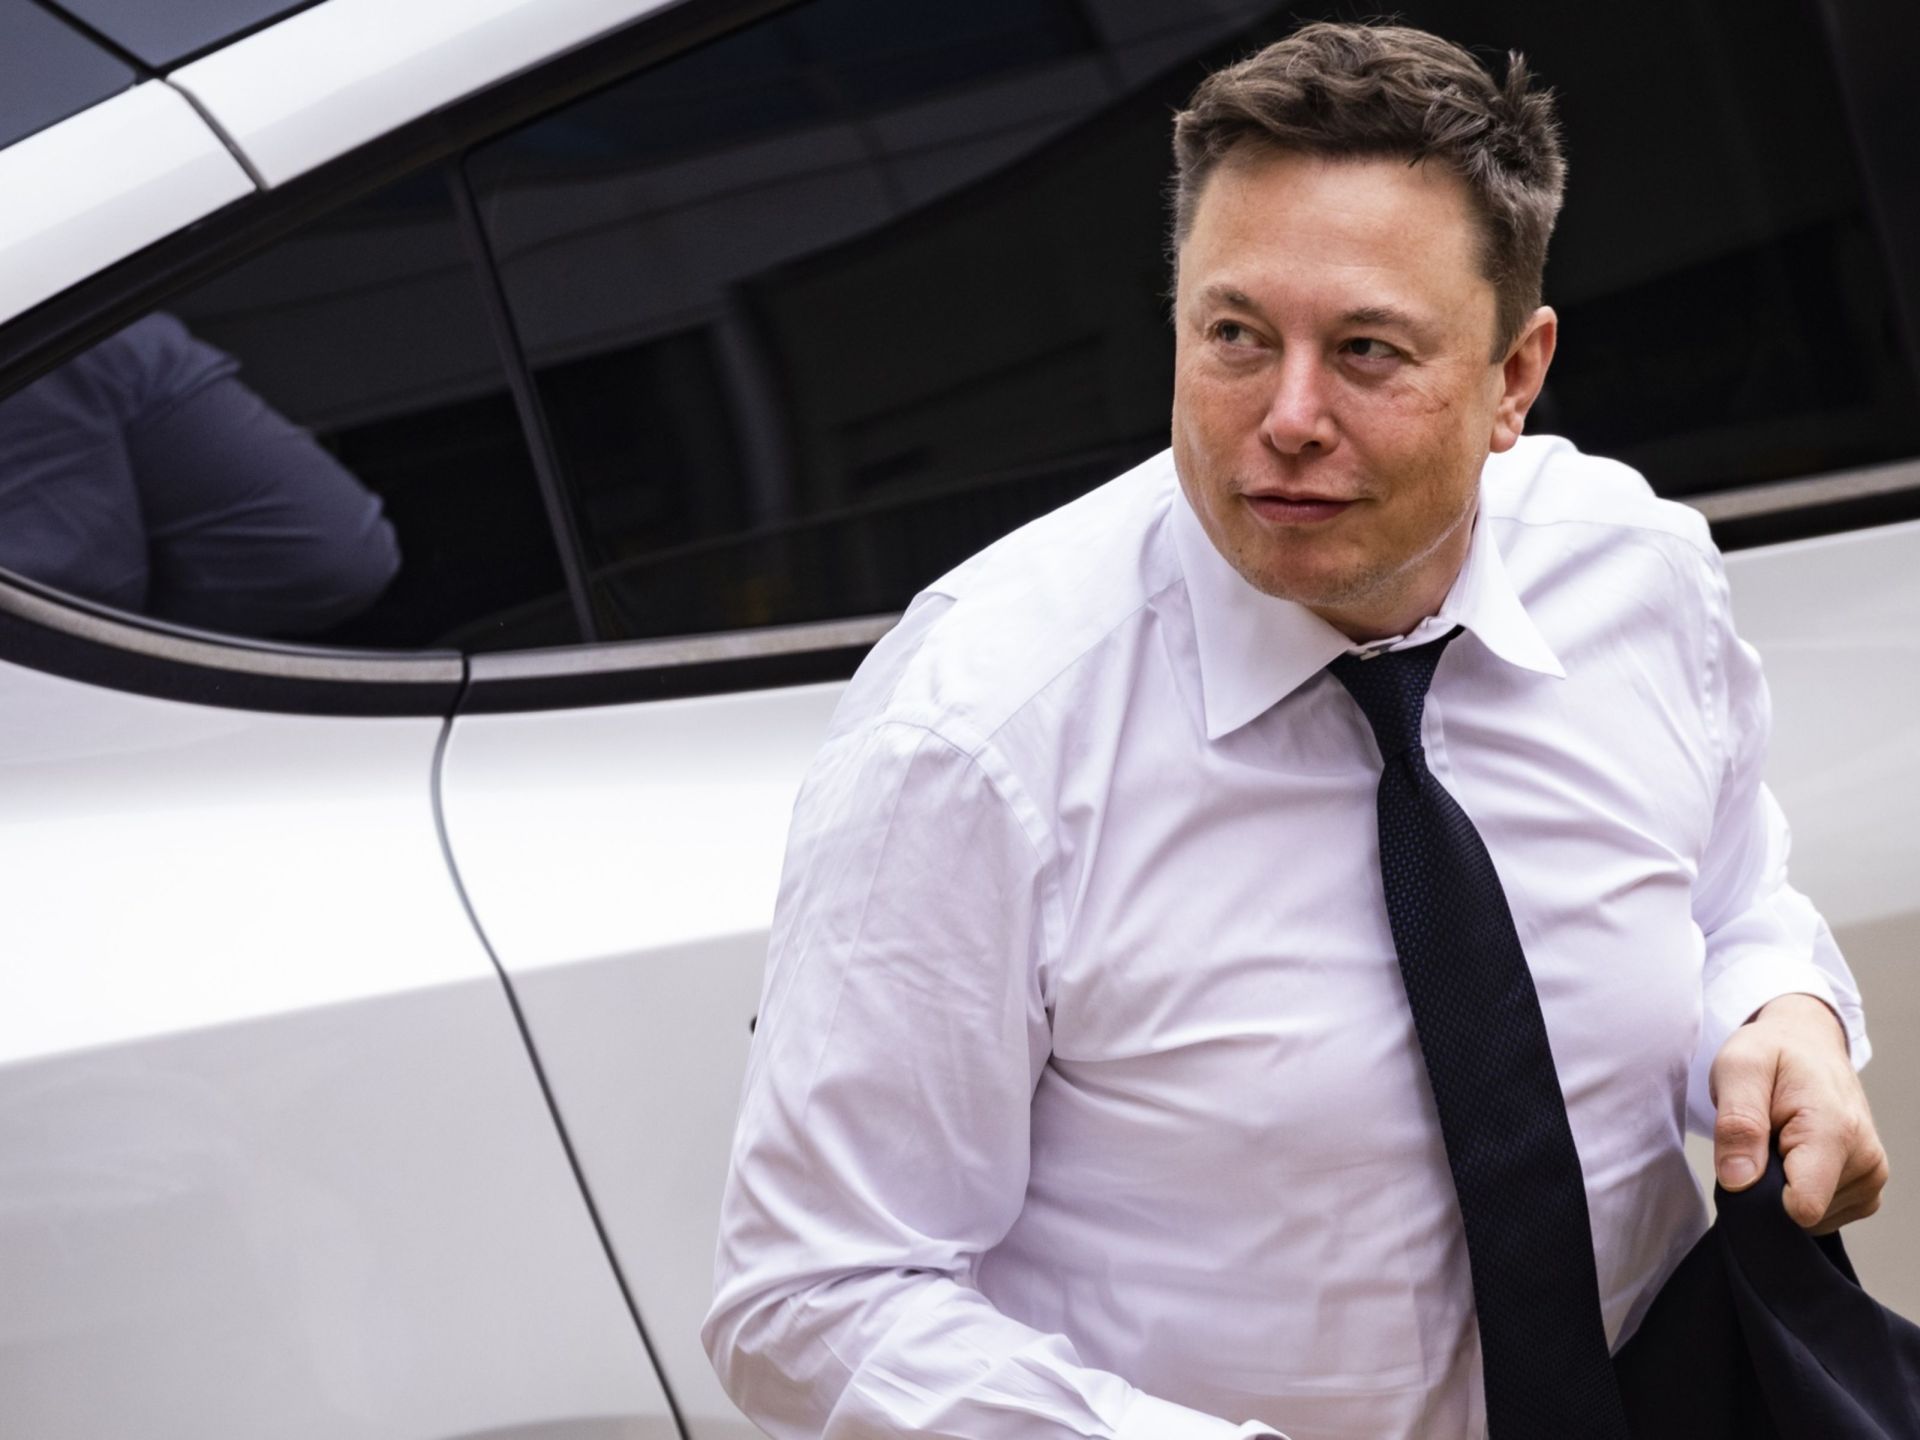 Musk says he had ‘no ill motive’ with his privatising Tesla tweet